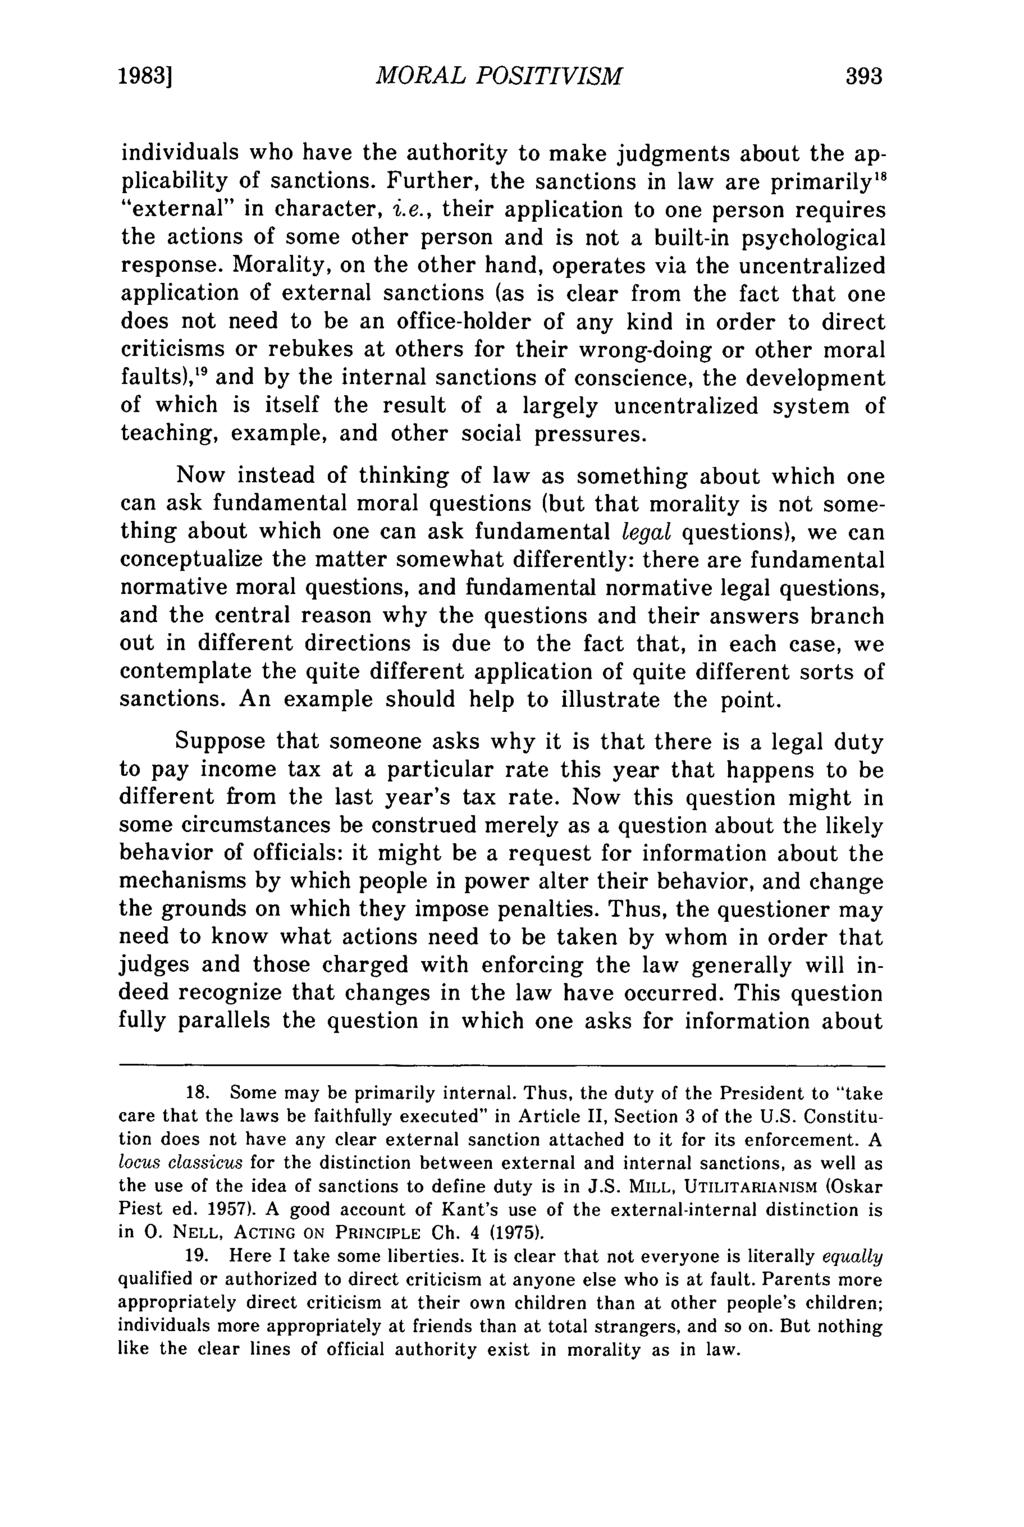 1983] Johnson: Moral Positivism and the Internal Legality of Morals MORAL POSITIVISM individuals who have the authority to make judgments about the applicability of sanctions.